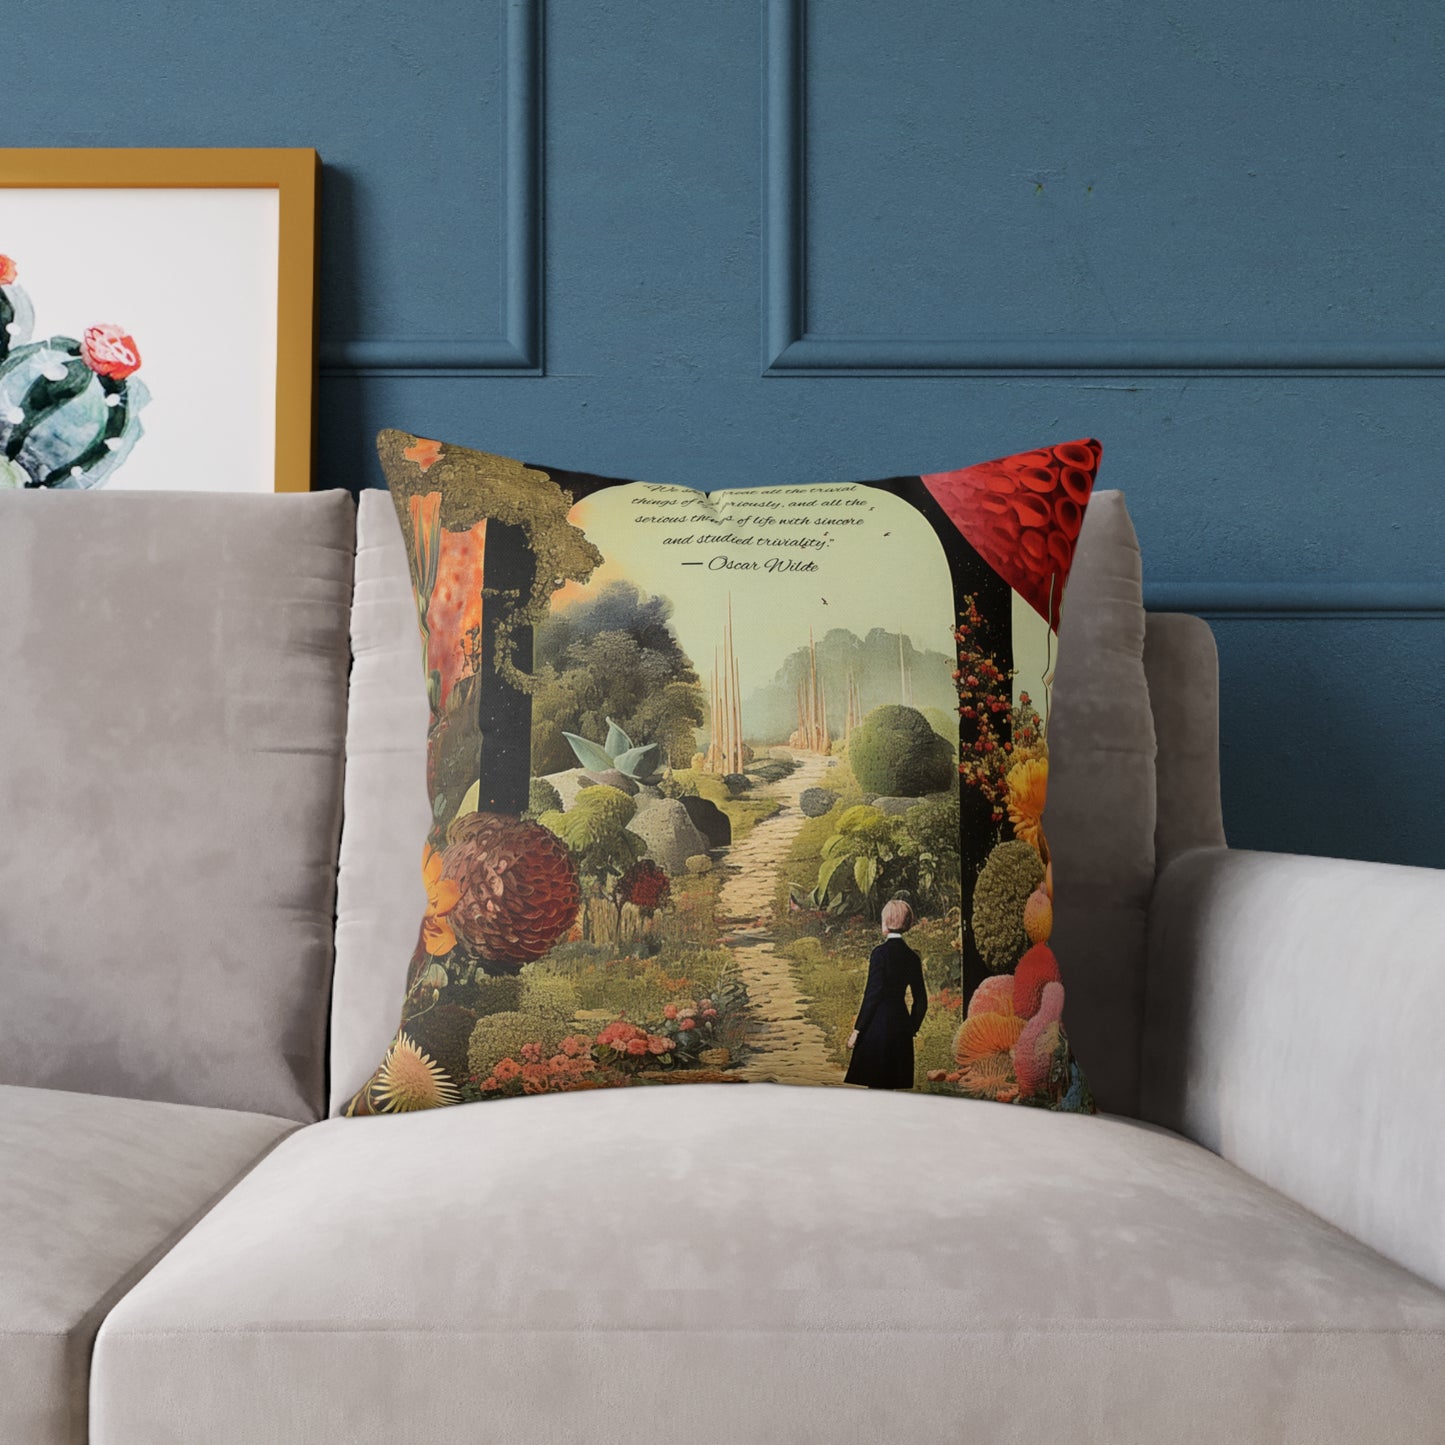 Oscar Wilde "Trivial things" Quote, Luxury Cushion